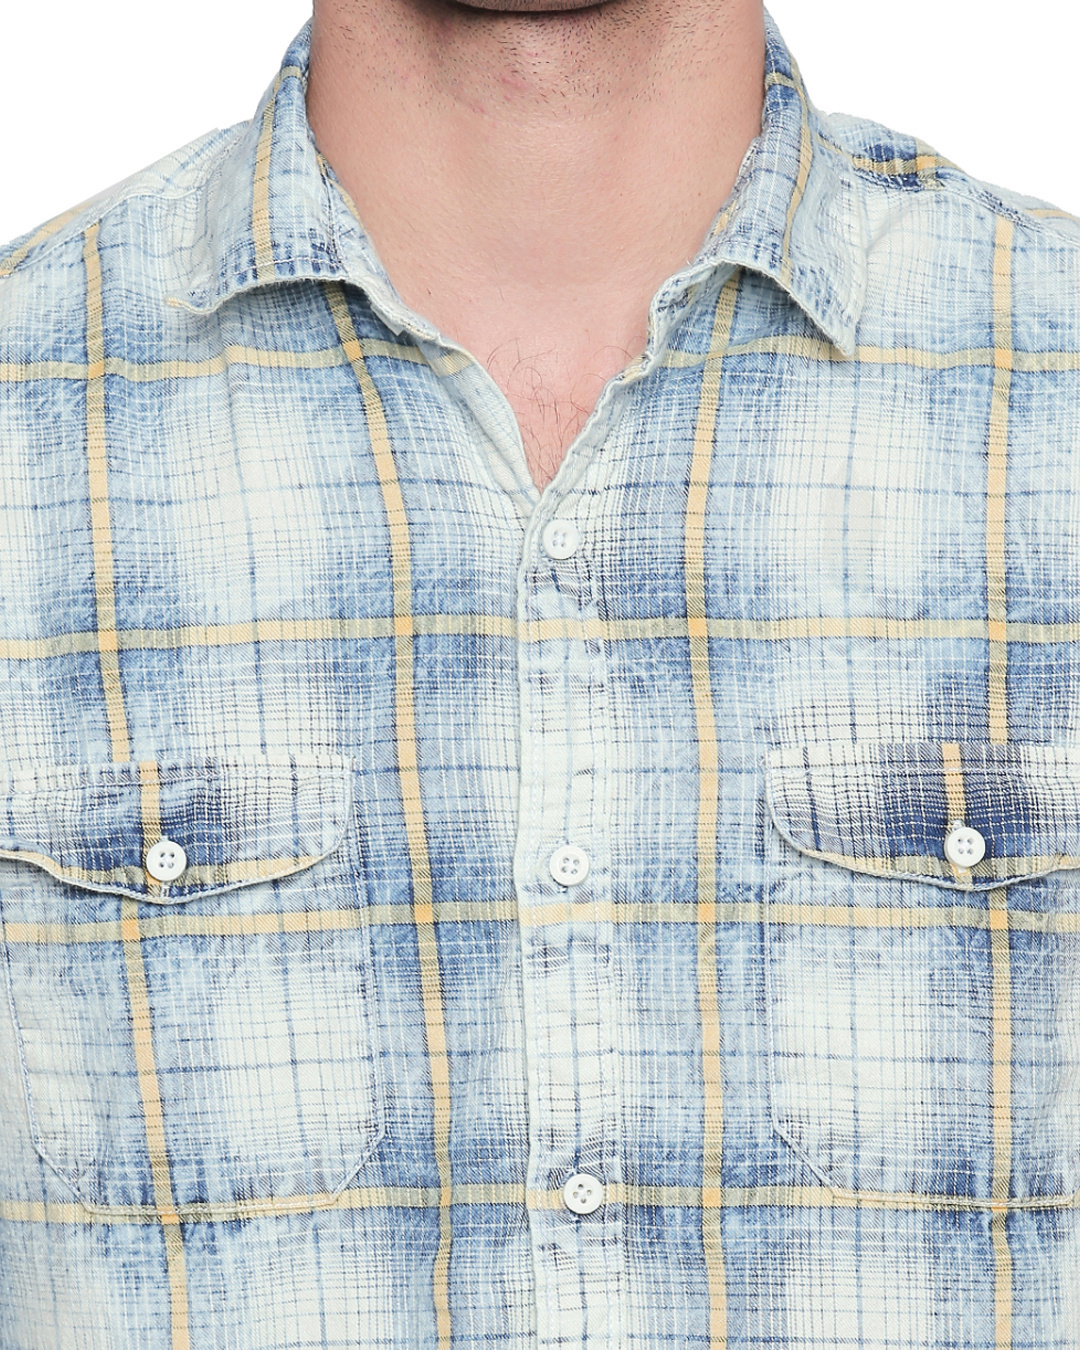 Shop Off White & Yellow Cotton Full Sleeve Checkered Shirt For Men-Back